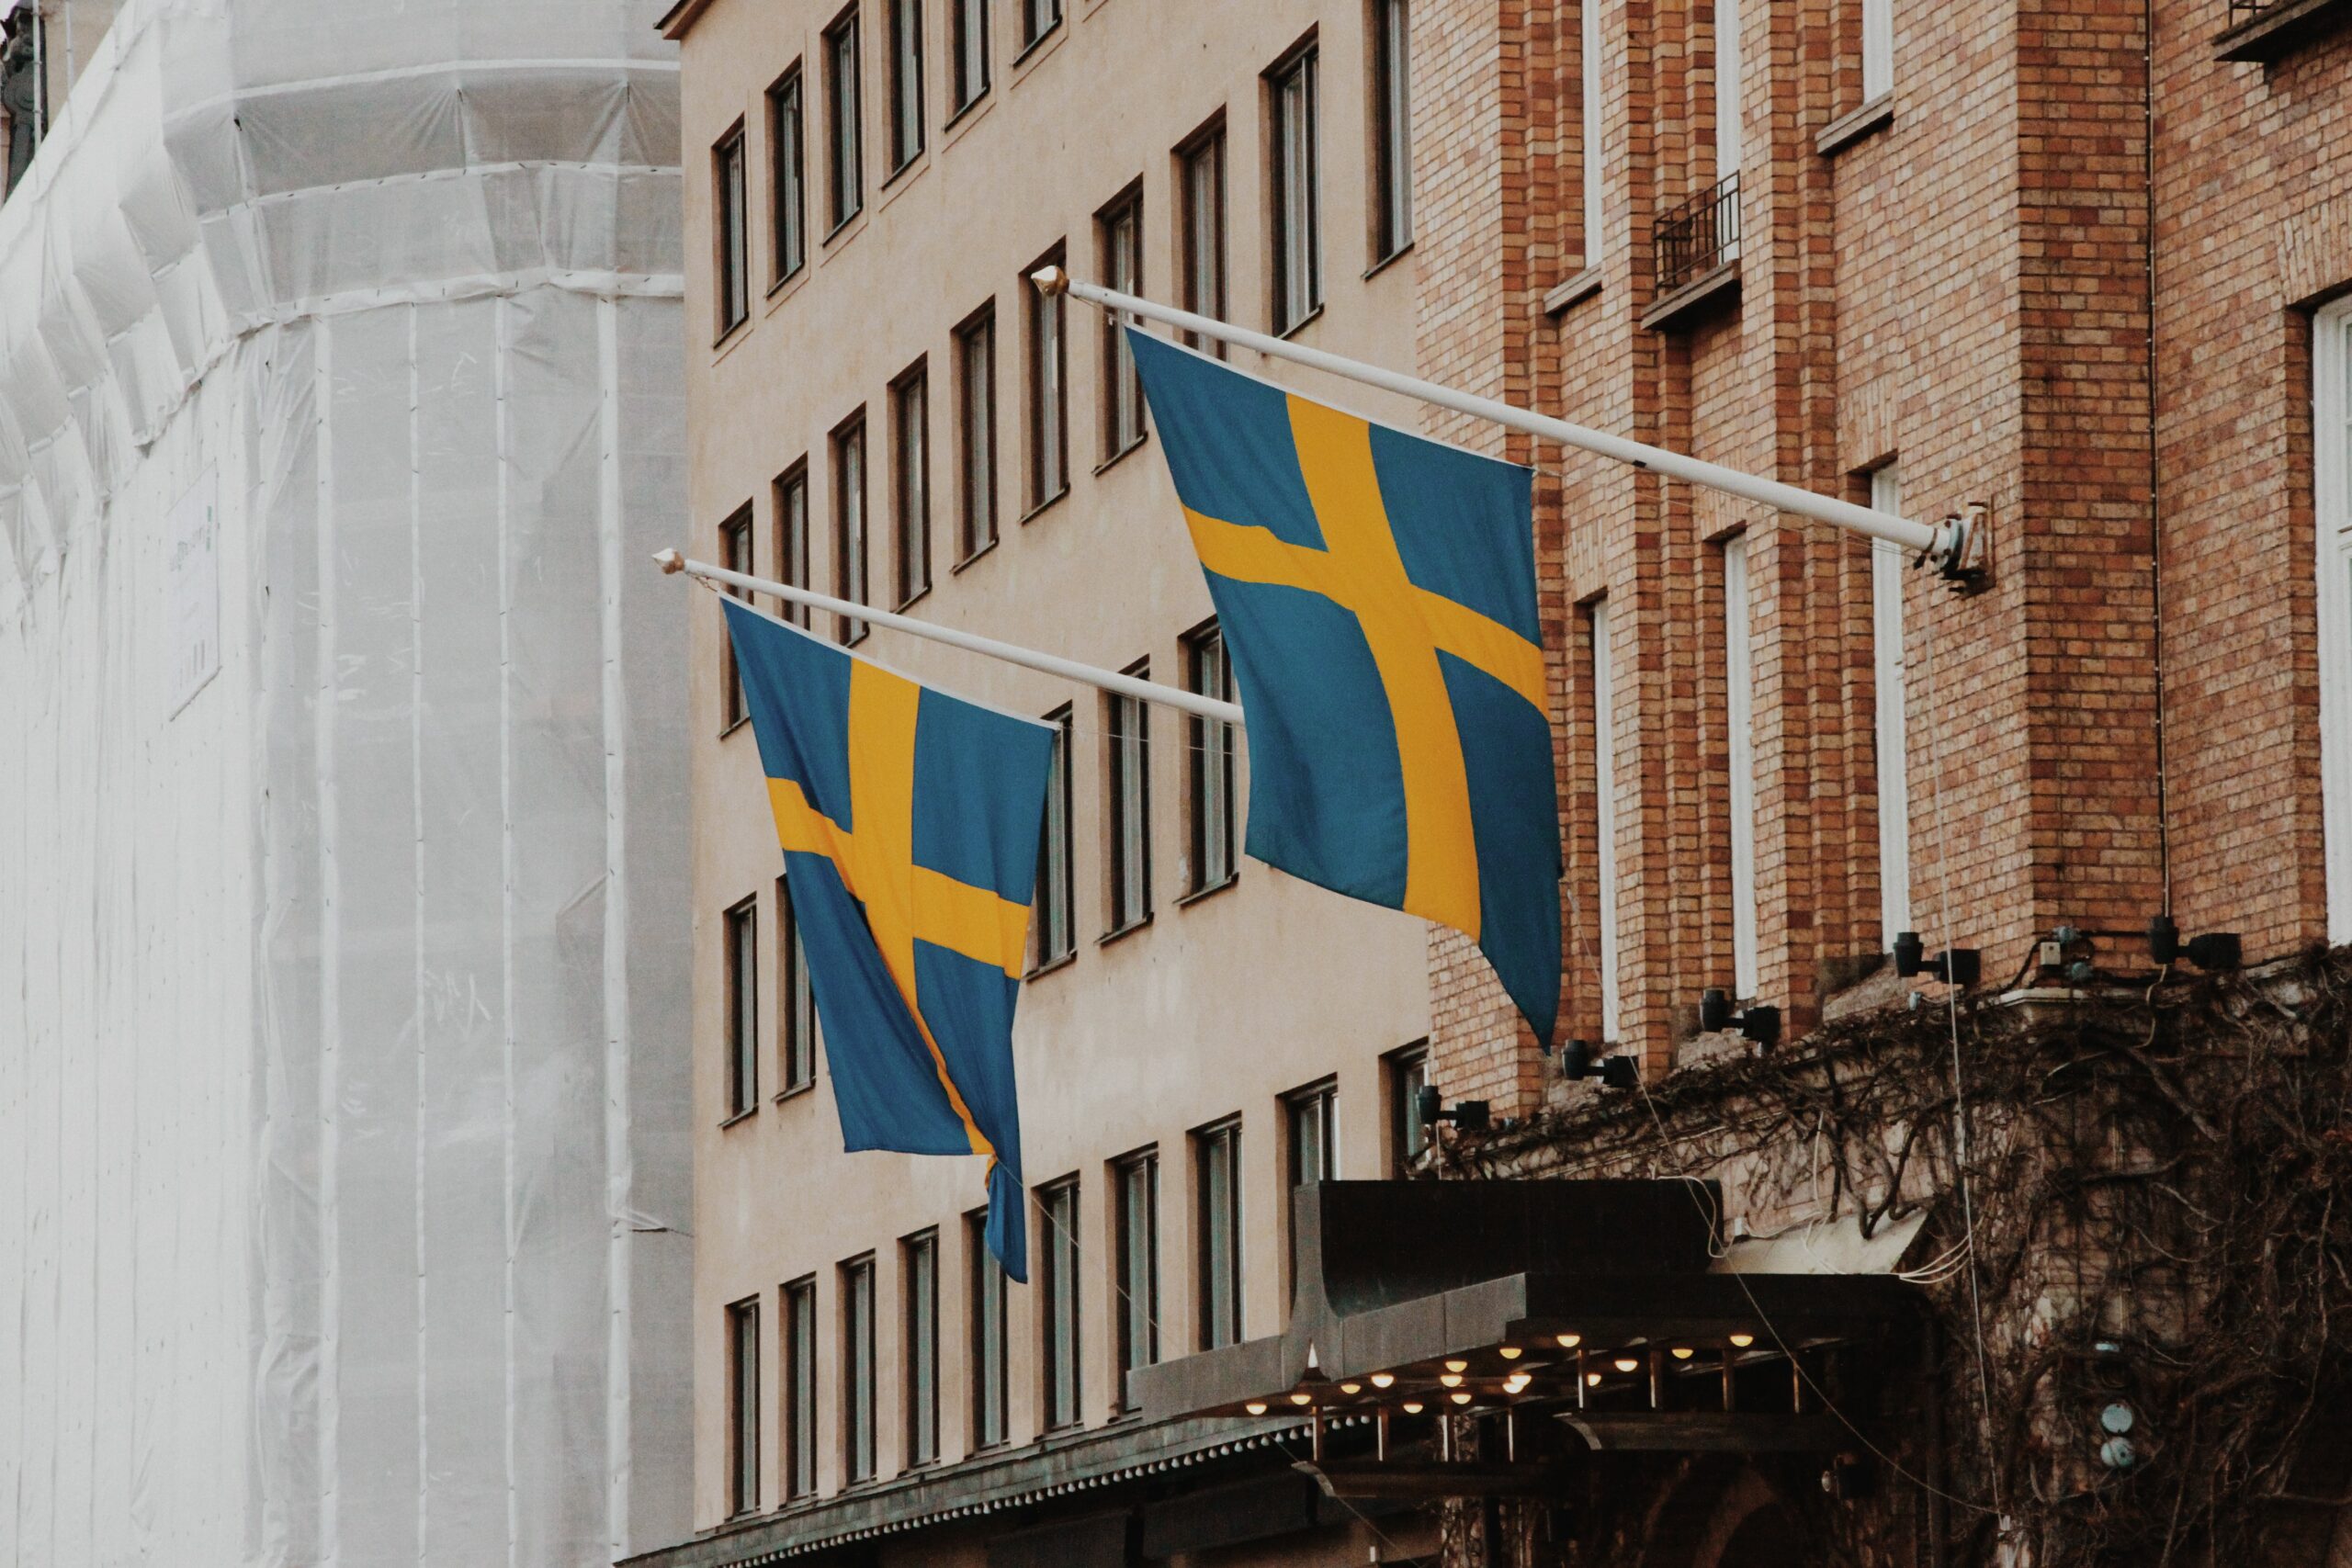 Sweden changes policy, saying the risks of hormones and surgery outweigh the benefits